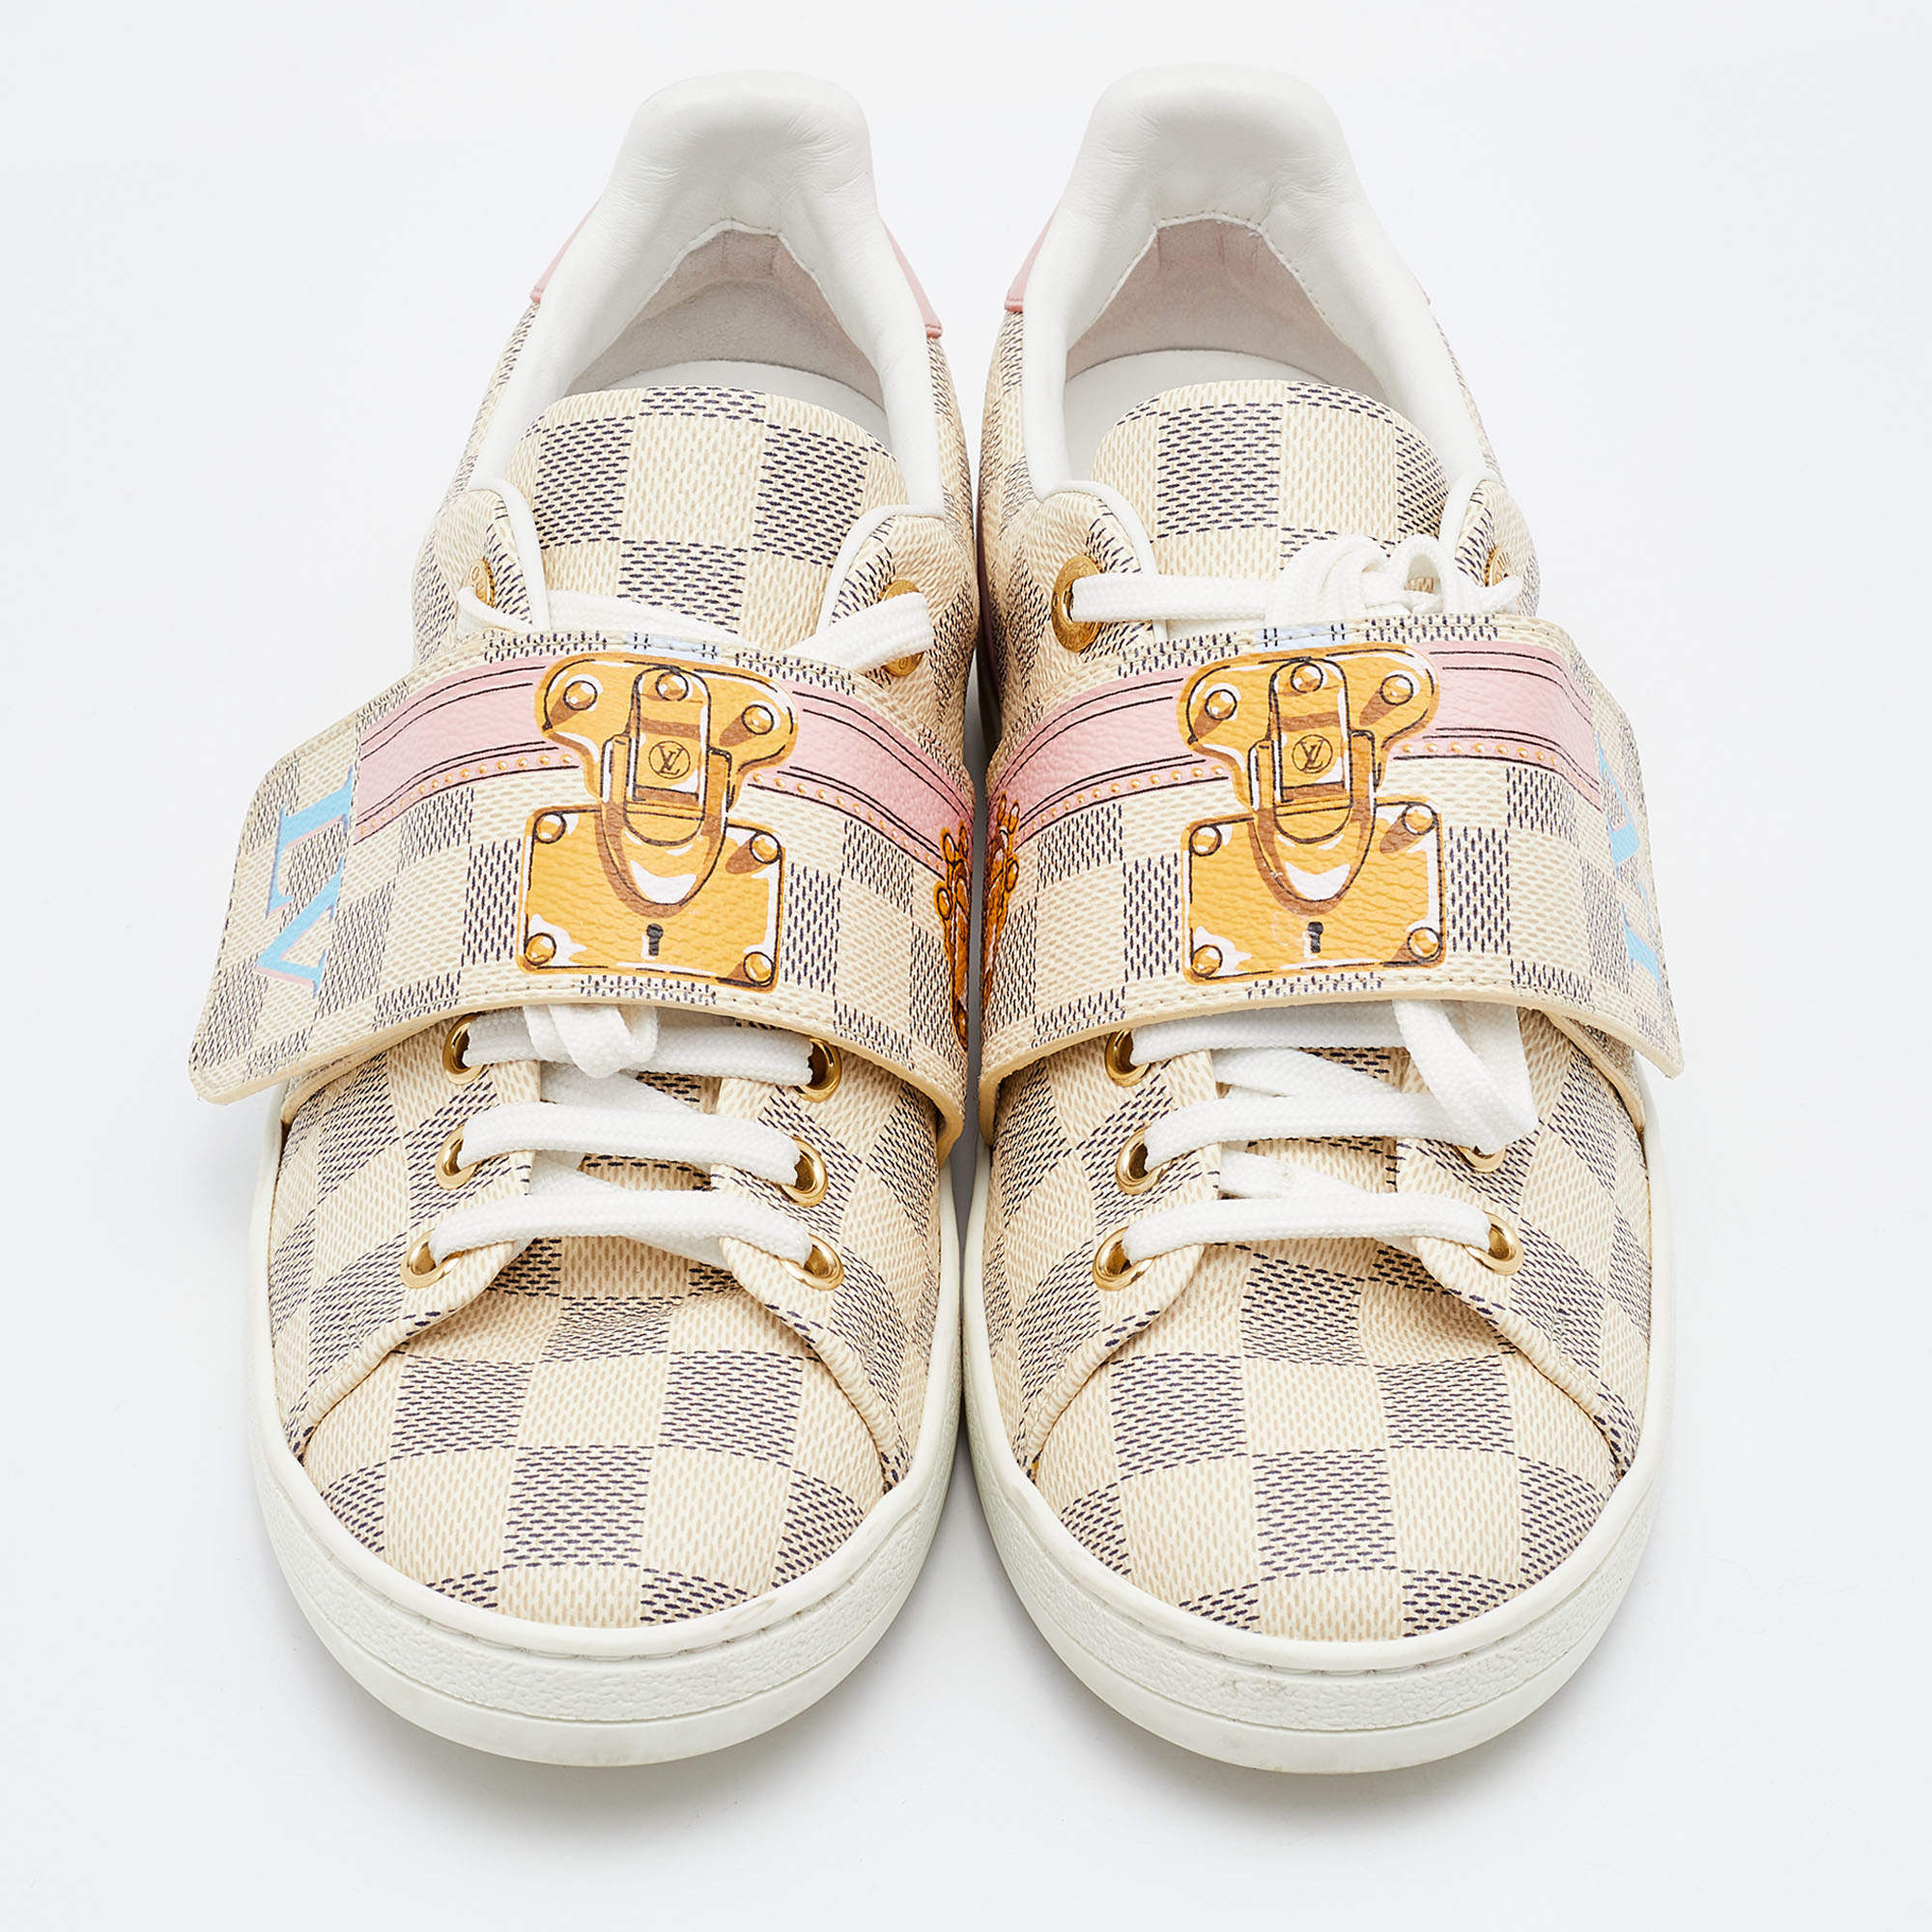 Frontrow Summer Trunks Damier Azur Sneakers Size 37.5